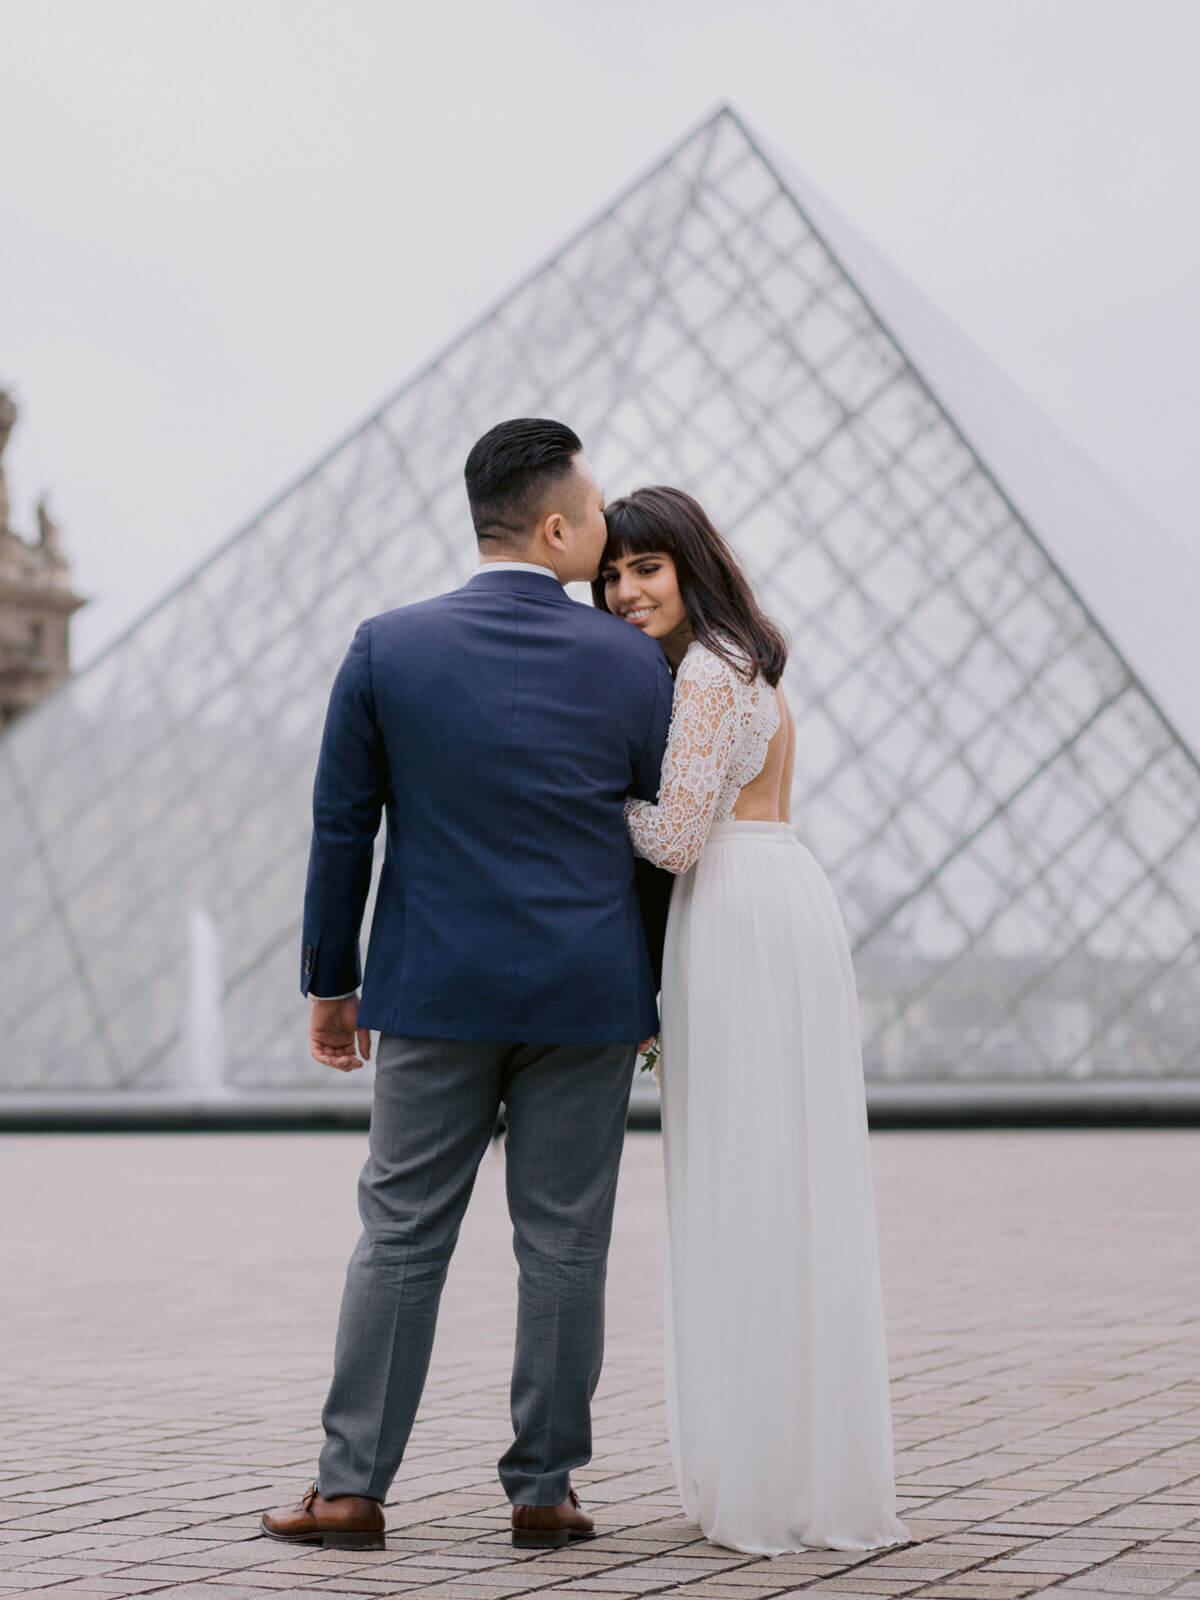 The groom is kissing his bride in the forehead, in Paris, France. Destination wedding image by Jenny Fu Studio